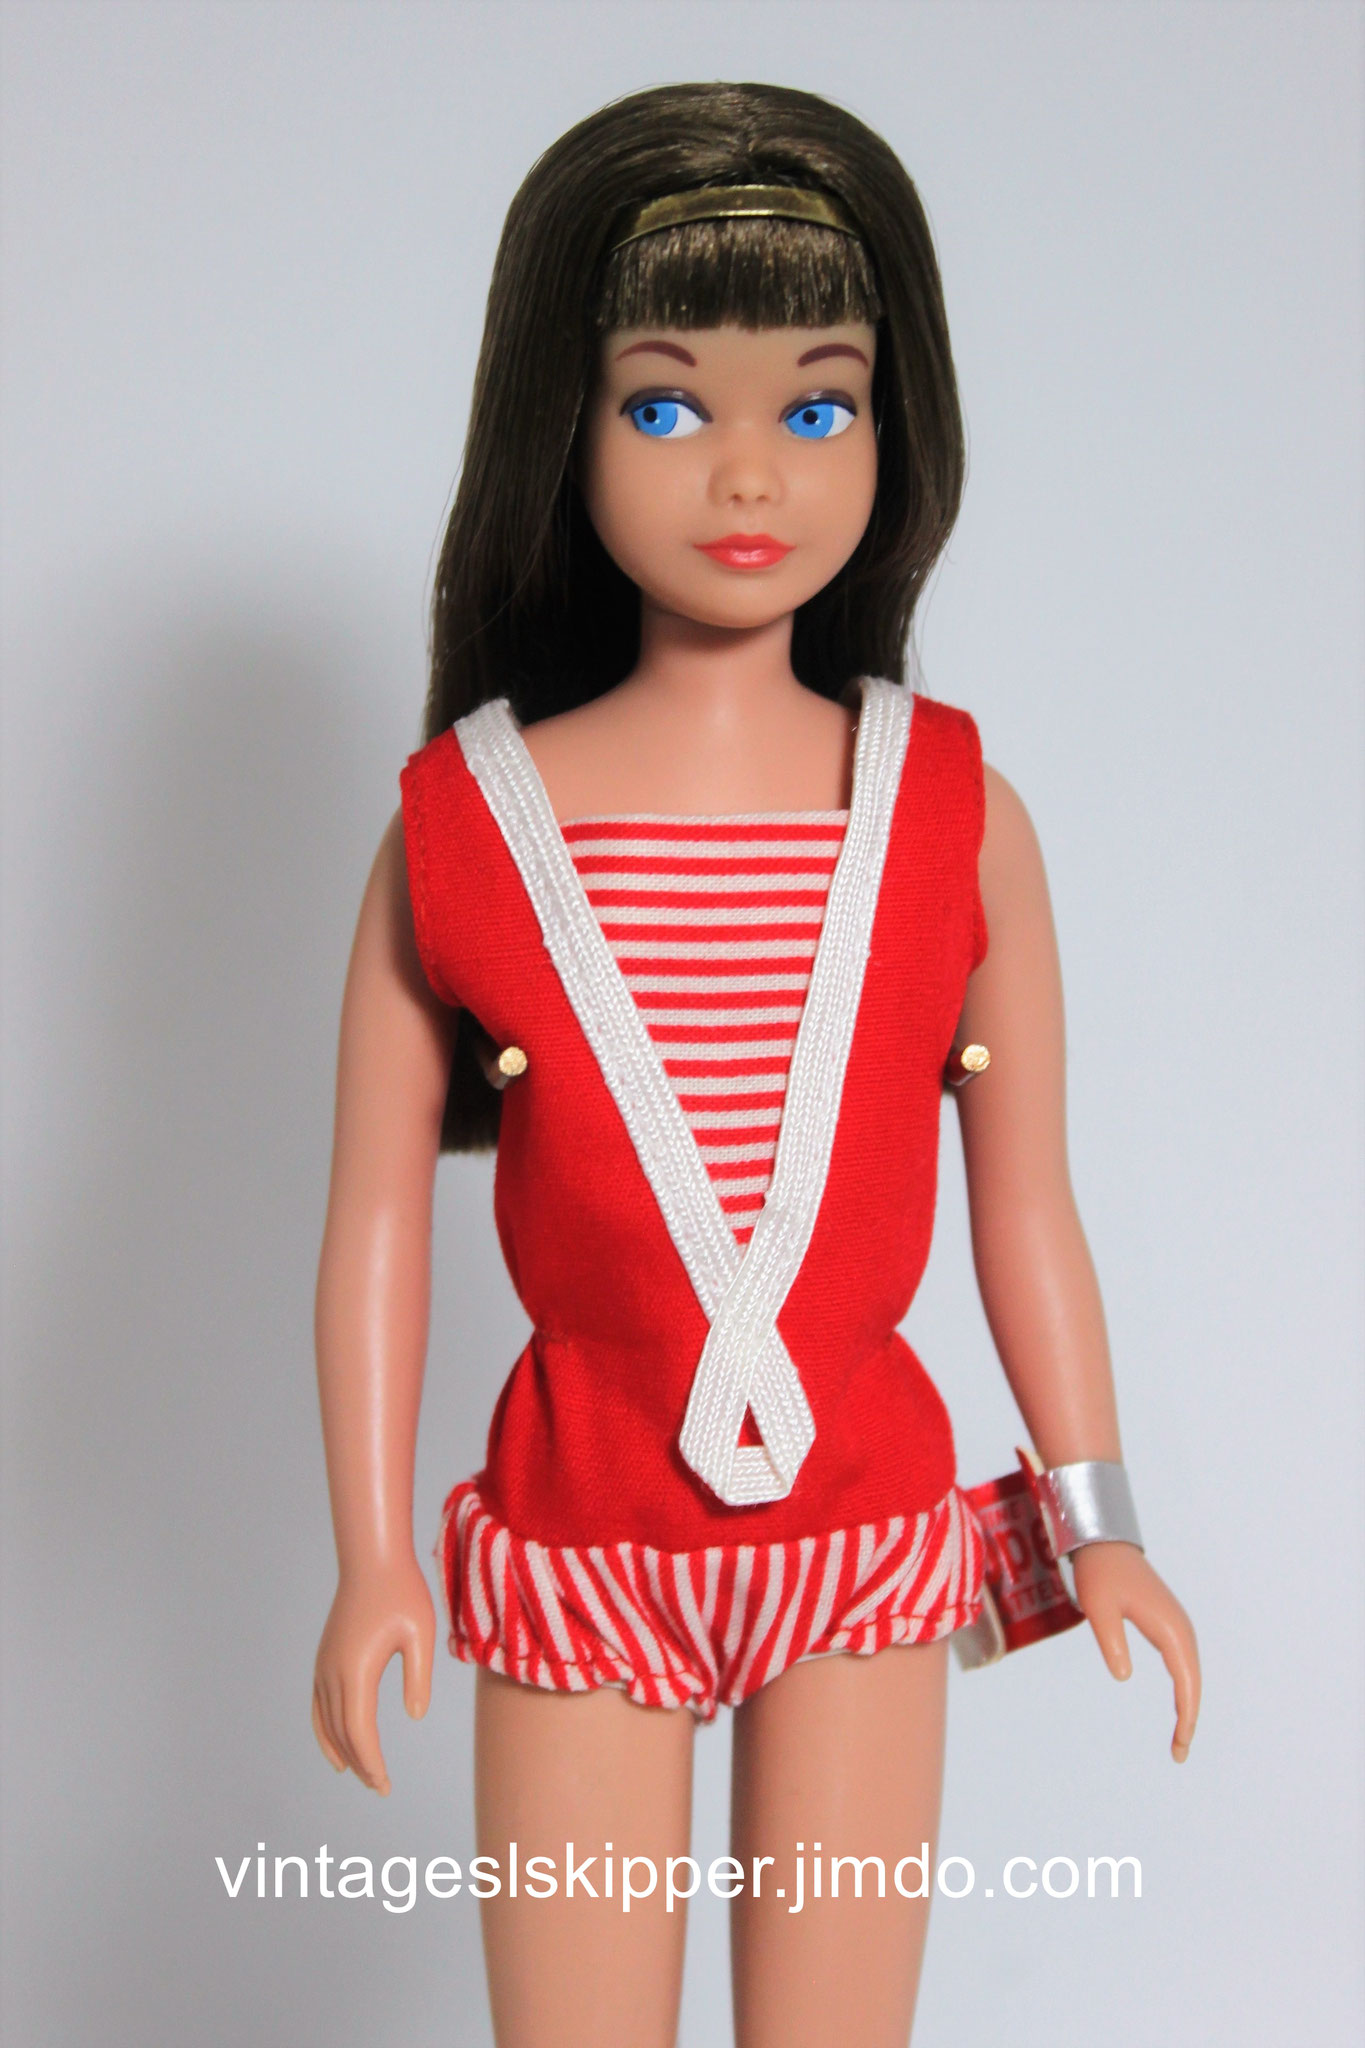 A Guide To Vintage Skipper Dolls Everything About Barbie's Little ...